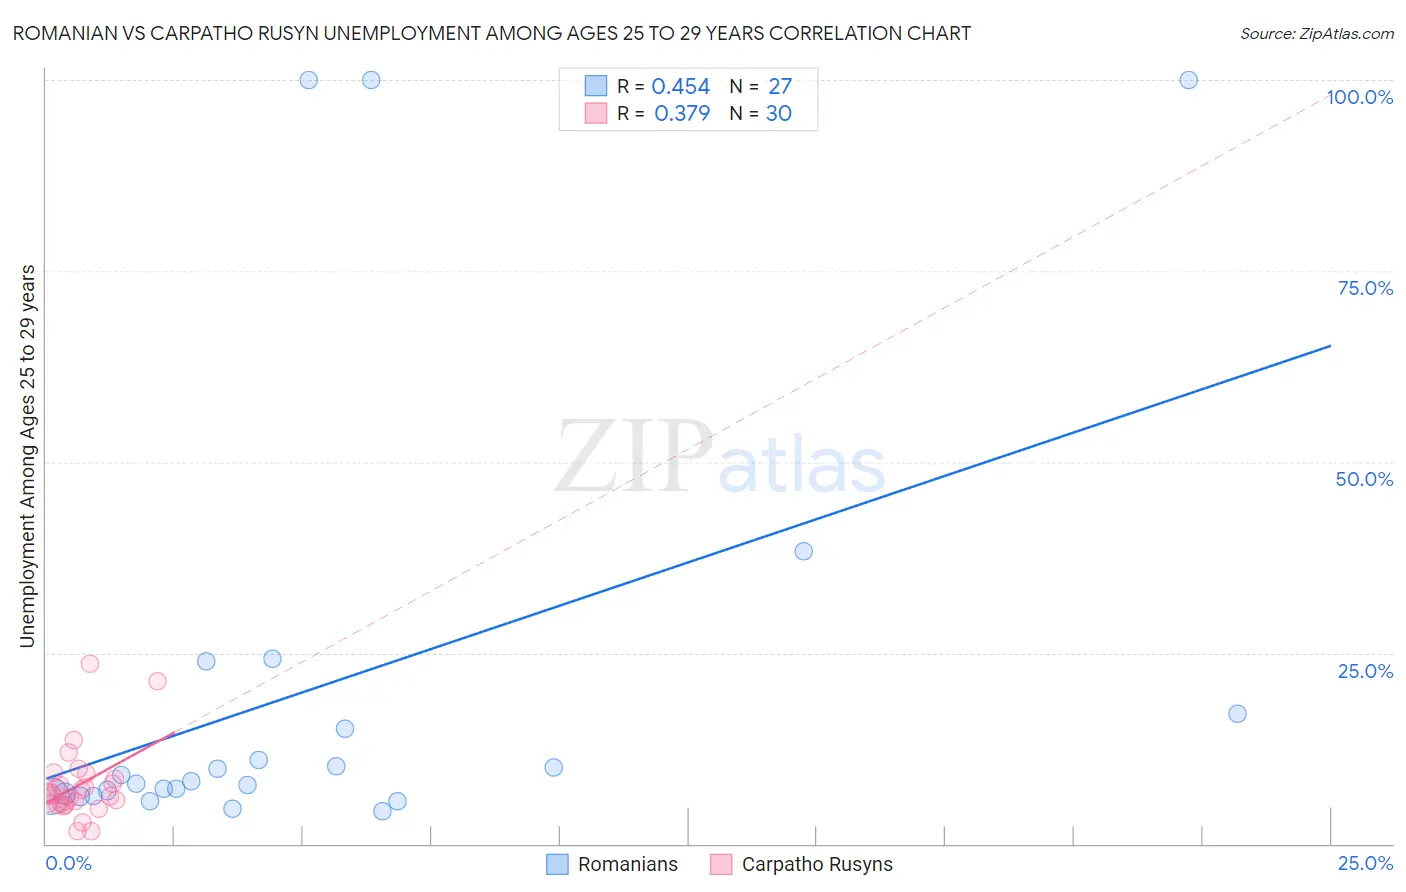 Romanian vs Carpatho Rusyn Unemployment Among Ages 25 to 29 years